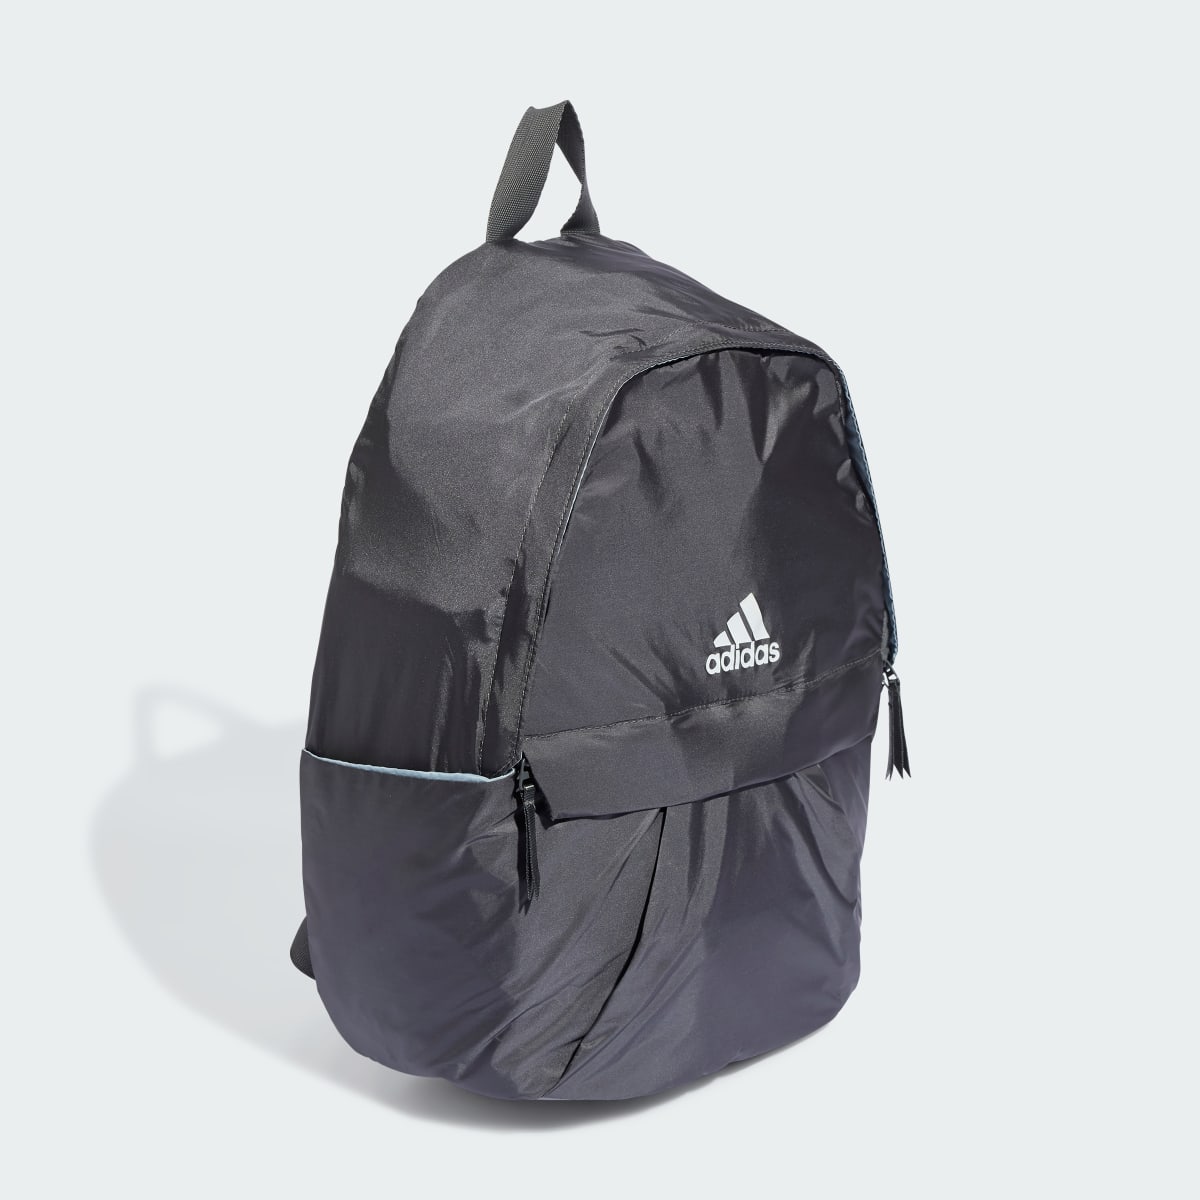 Adidas Classic Gen Z Backpack. 4